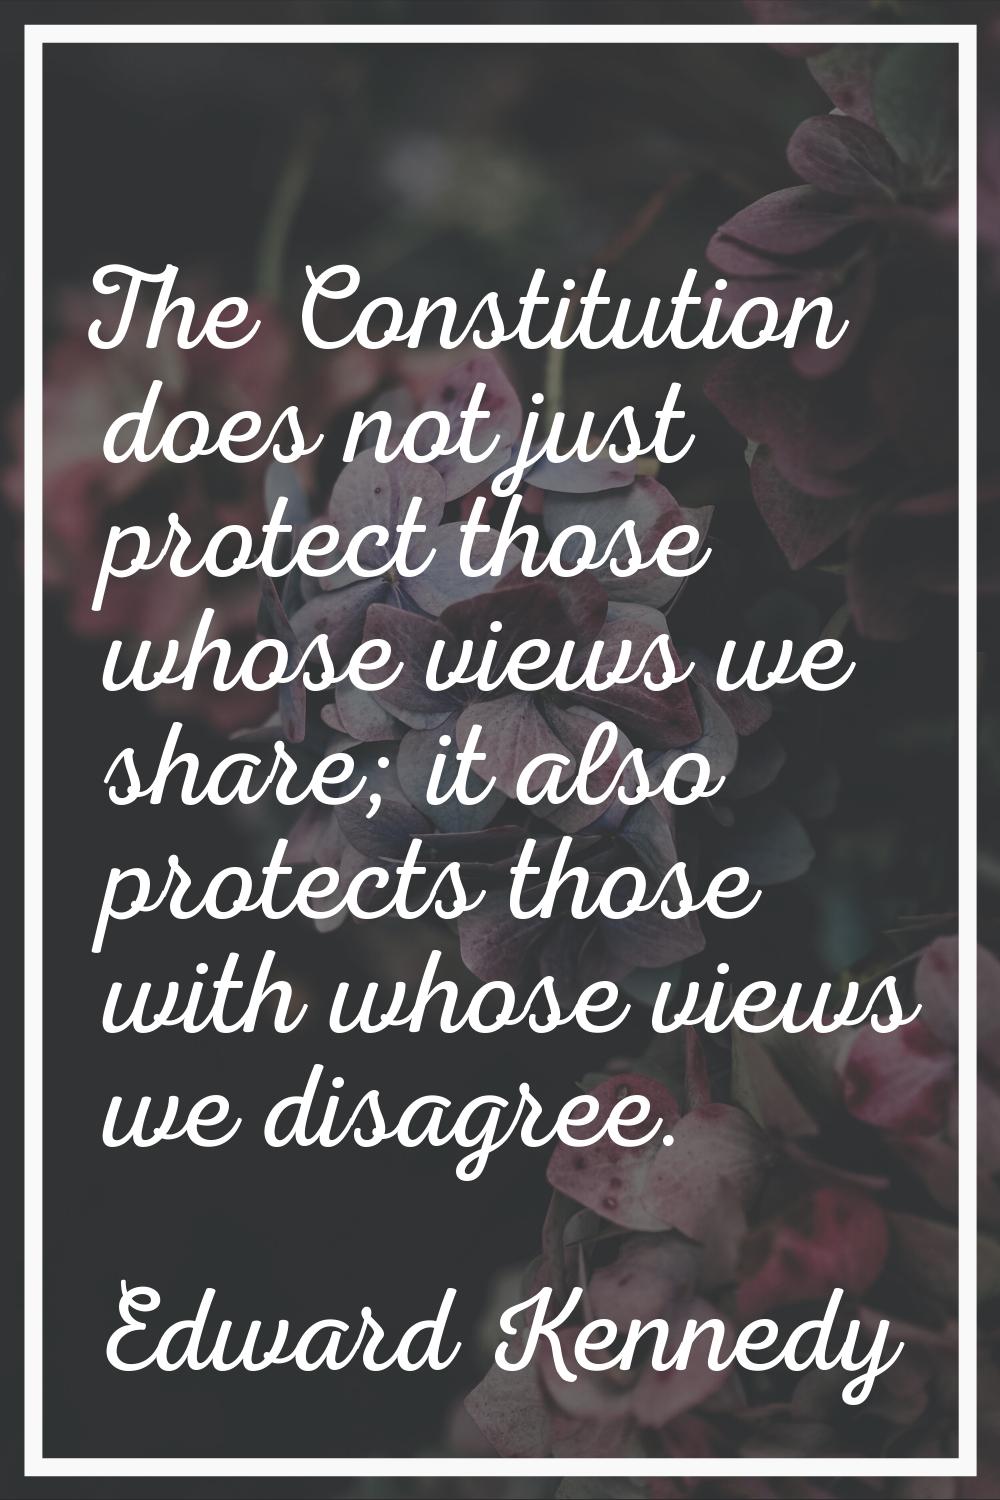 The Constitution does not just protect those whose views we share; it also protects those with whos